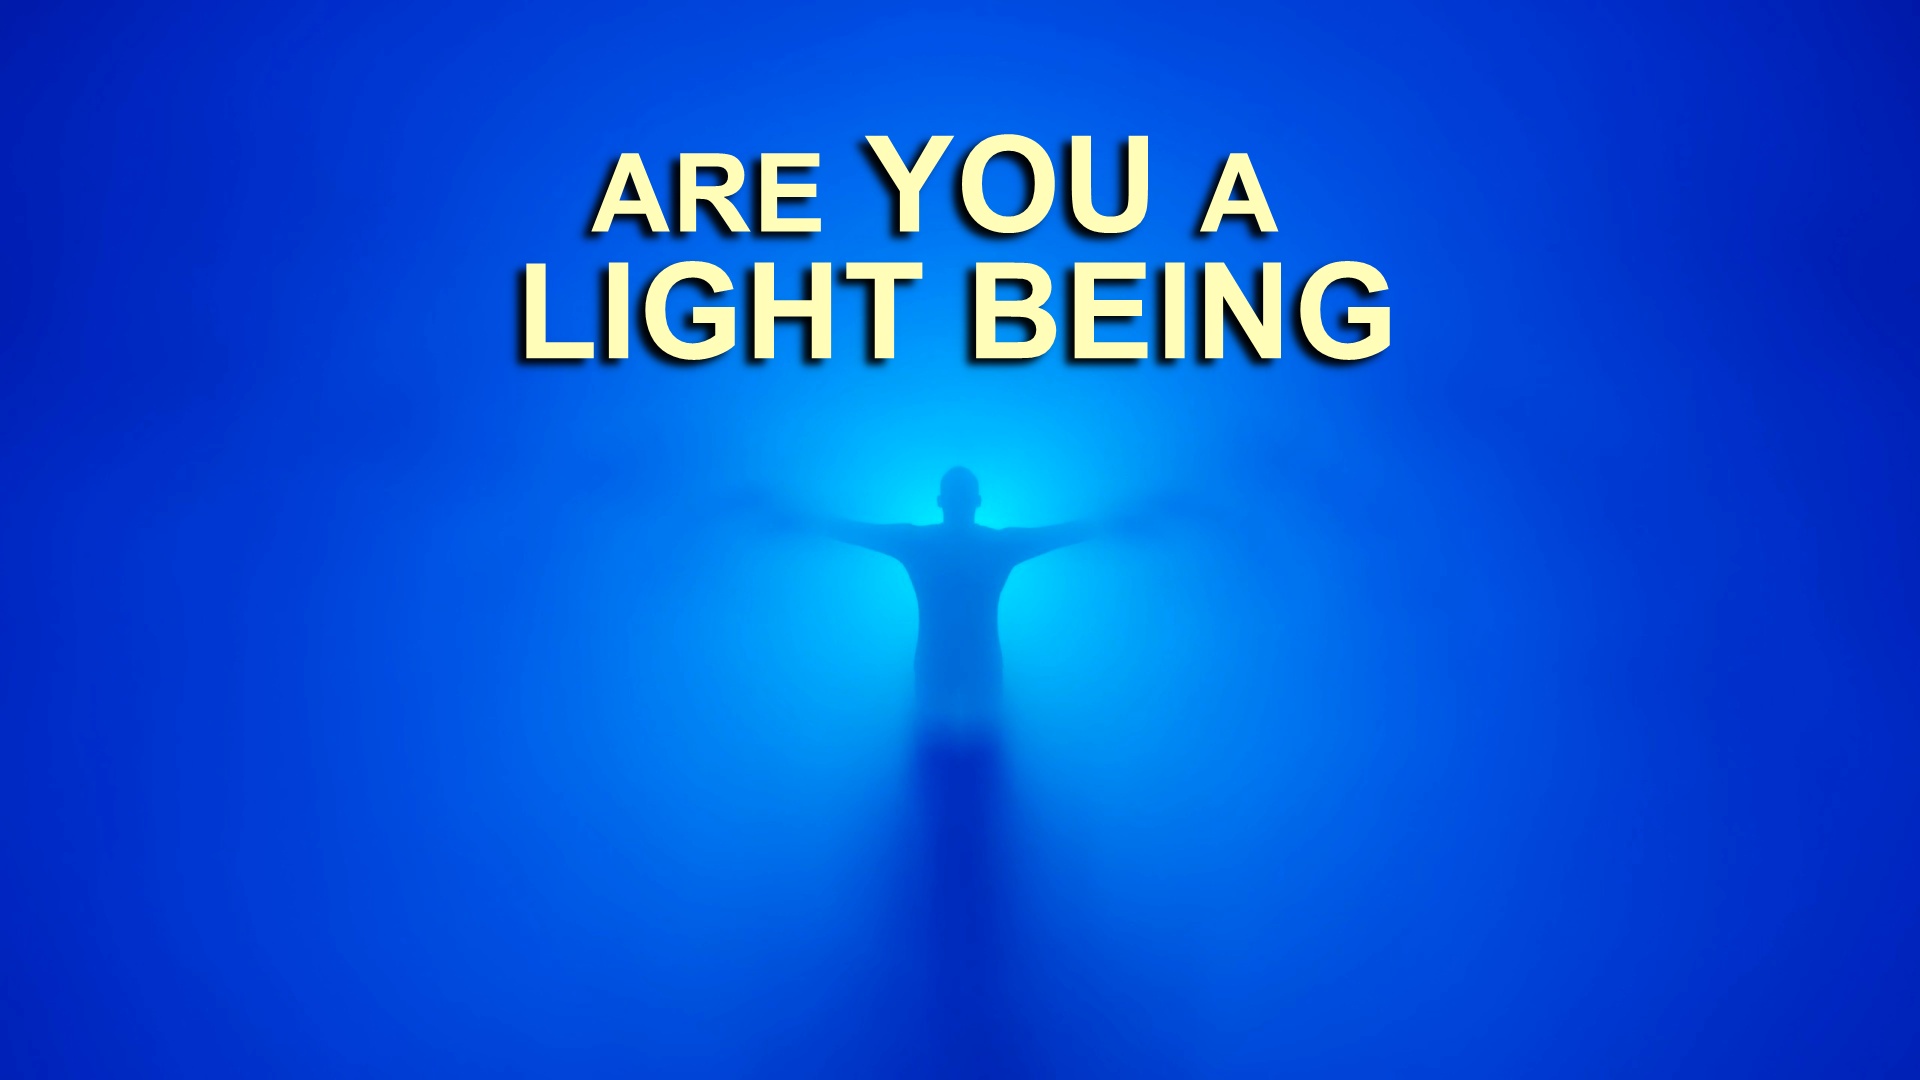 Are you a light being